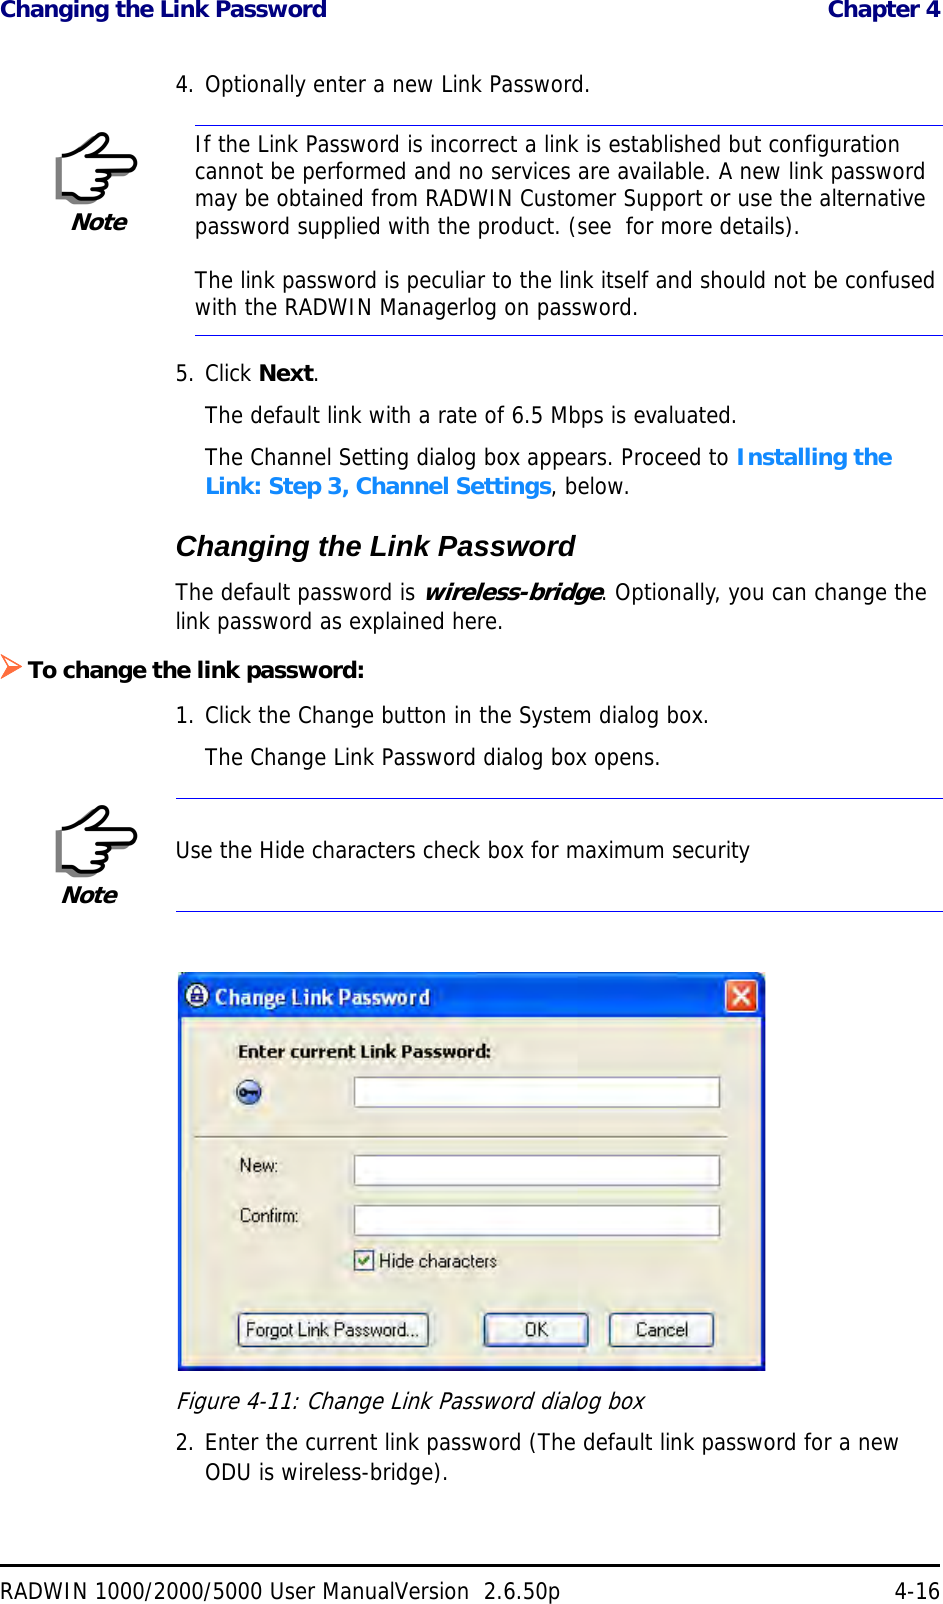 Changing the Link Password  Chapter 4RADWIN 1000/2000/5000 User ManualVersion  2.6.50p 4-164. Optionally enter a new Link Password. 5. Click Next.The default link with a rate of 6.5 Mbps is evaluated.The Channel Setting dialog box appears. Proceed to Installing the Link: Step 3, Channel Settings, below.Changing the Link PasswordThe default password is wireless-bridge. Optionally, you can change the link password as explained here.To change the link password:1. Click the Change button in the System dialog box.The Change Link Password dialog box opens.Figure 4-11: Change Link Password dialog box2. Enter the current link password (The default link password for a new ODU is wireless-bridge).NoteIf the Link Password is incorrect a link is established but configuration cannot be performed and no services are available. A new link password may be obtained from RADWIN Customer Support or use the alternative password supplied with the product. (see  for more details).The link password is peculiar to the link itself and should not be confused with the RADWIN Managerlog on password.NoteUse the Hide characters check box for maximum security